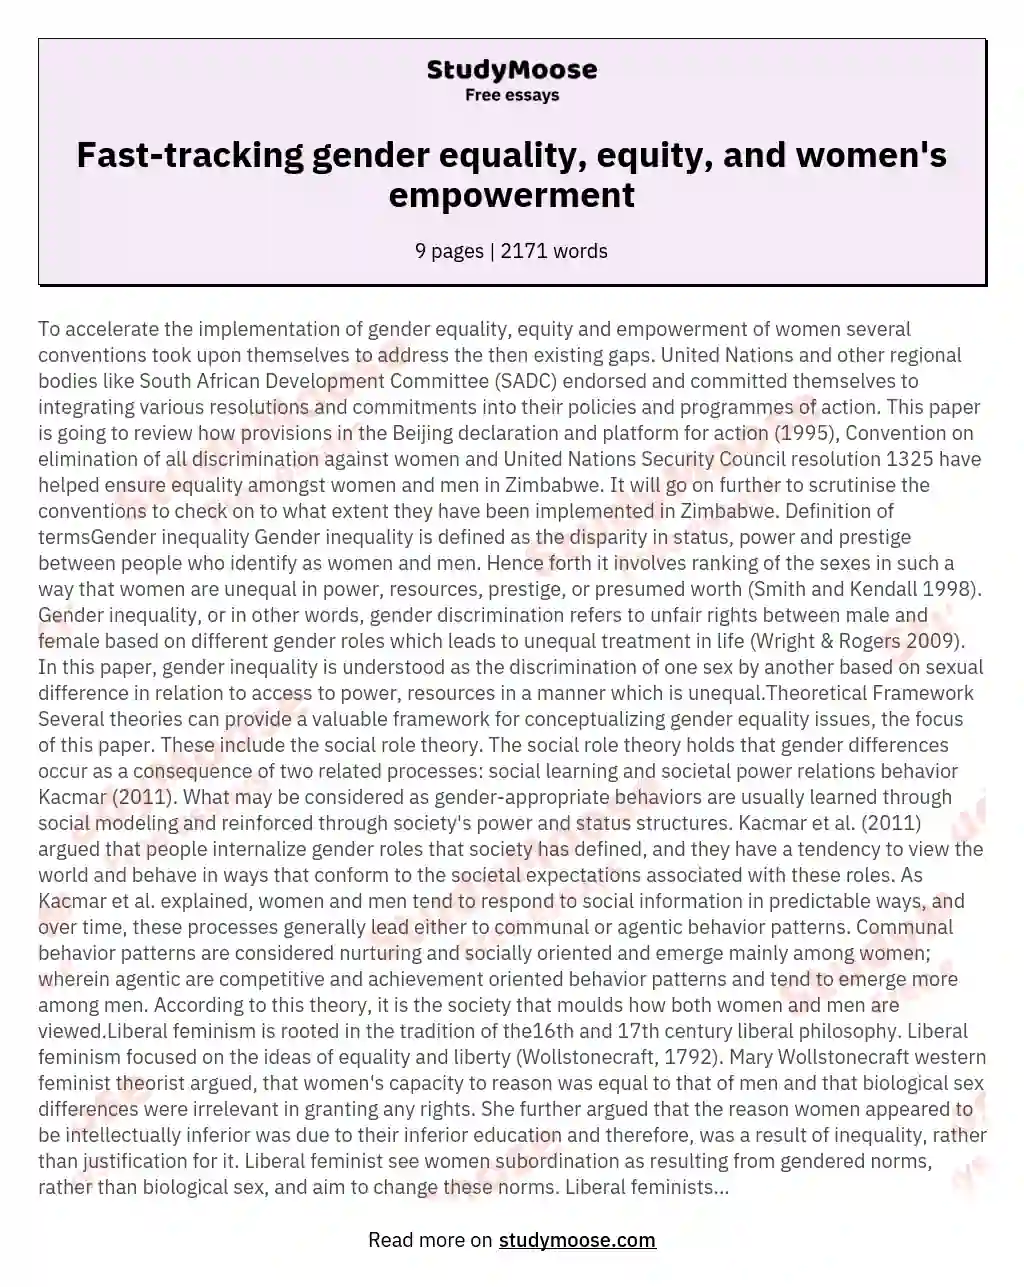 Fast-tracking gender equality, equity, and women's empowerment